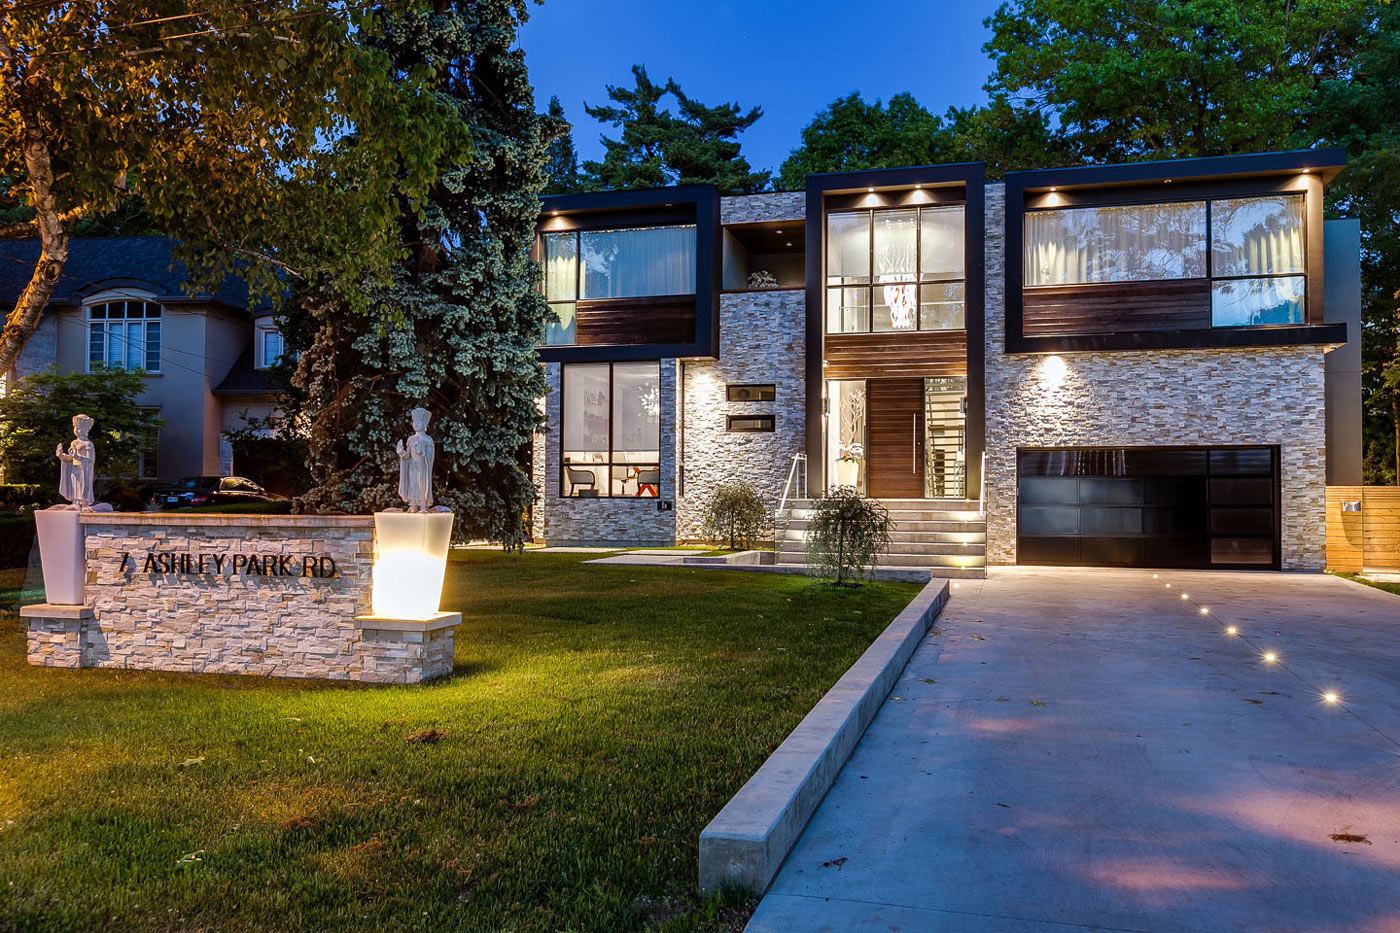 Hampstead,QC,Canada: a luxury Single Family Home for Sale in Hampstead,  Quebec Property ID:25117547 - Christie's International Real Estate